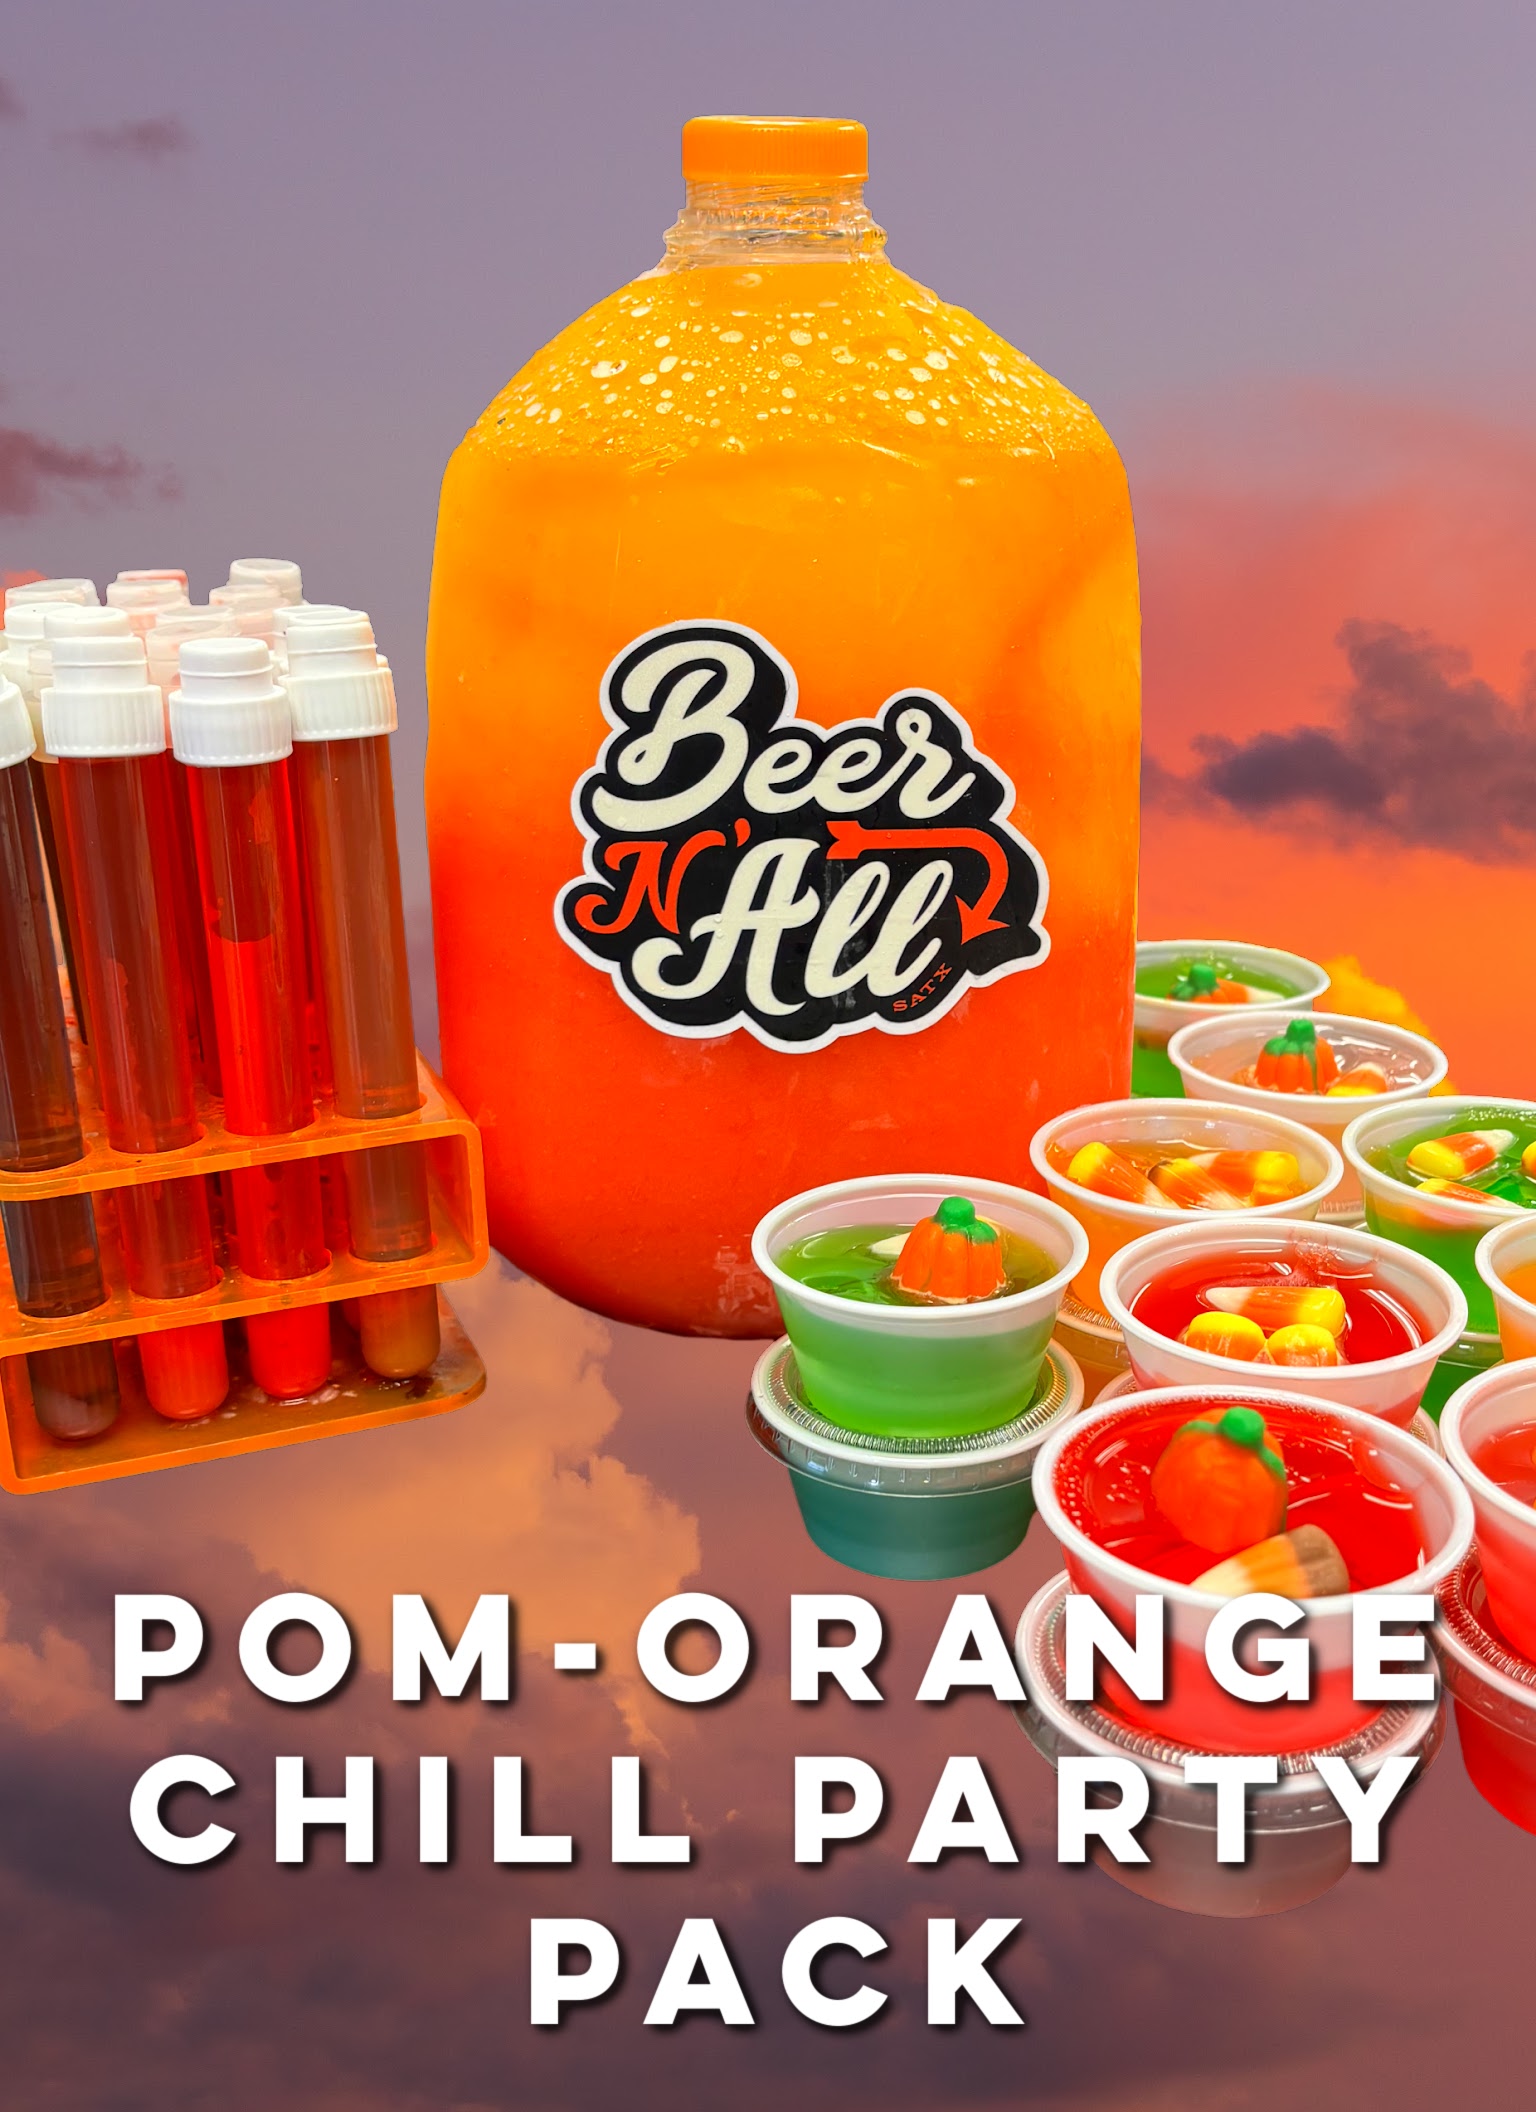 Pom-Orange Chill Party Pack